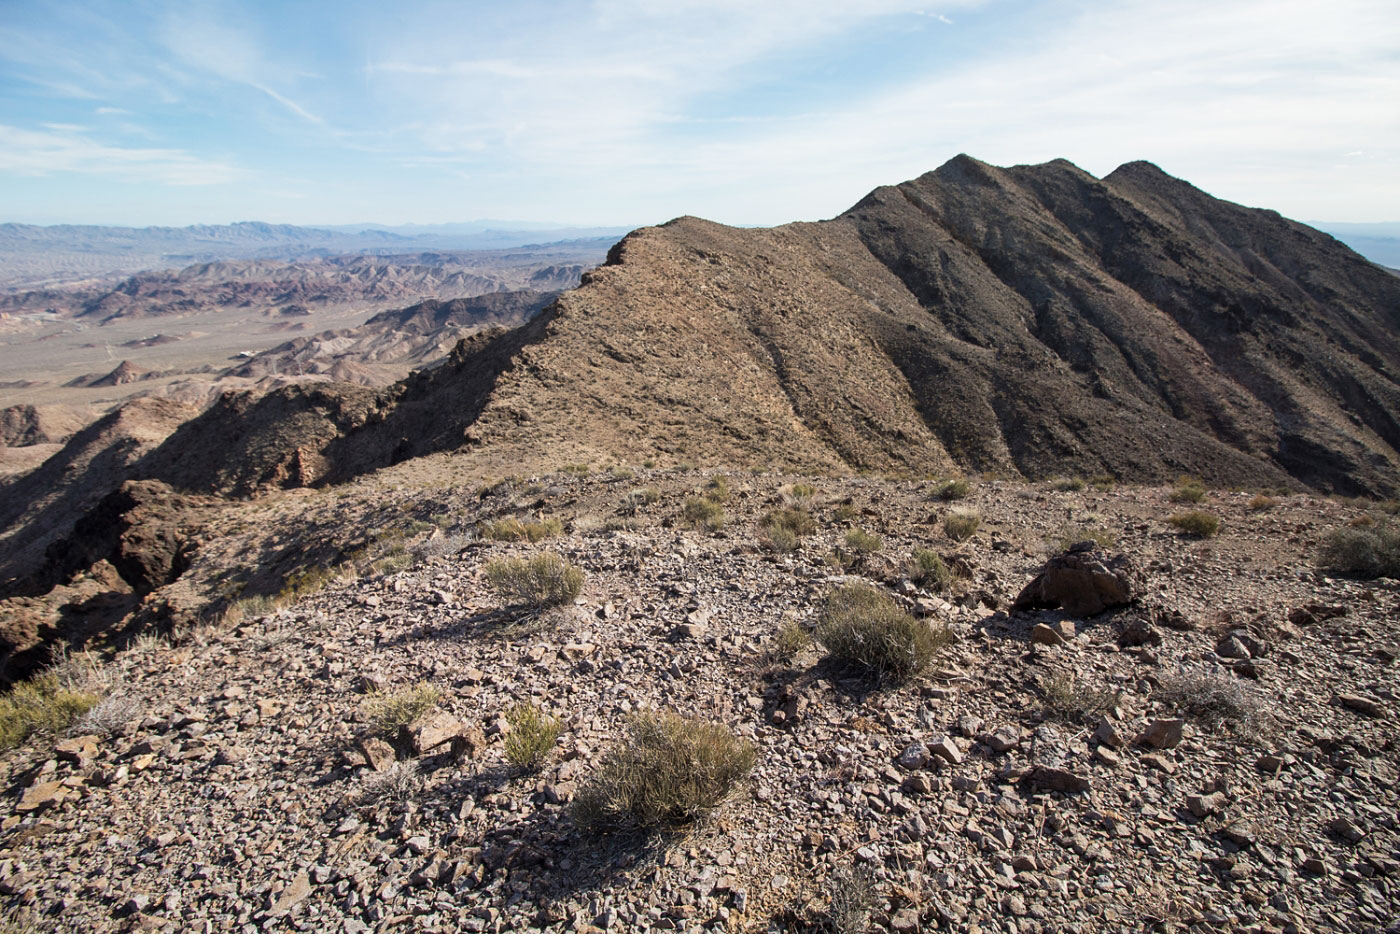 Hike Falls Peak and River Mountains Loop in Lake Mead National Recreation Area, Nevada - Stav is Lost